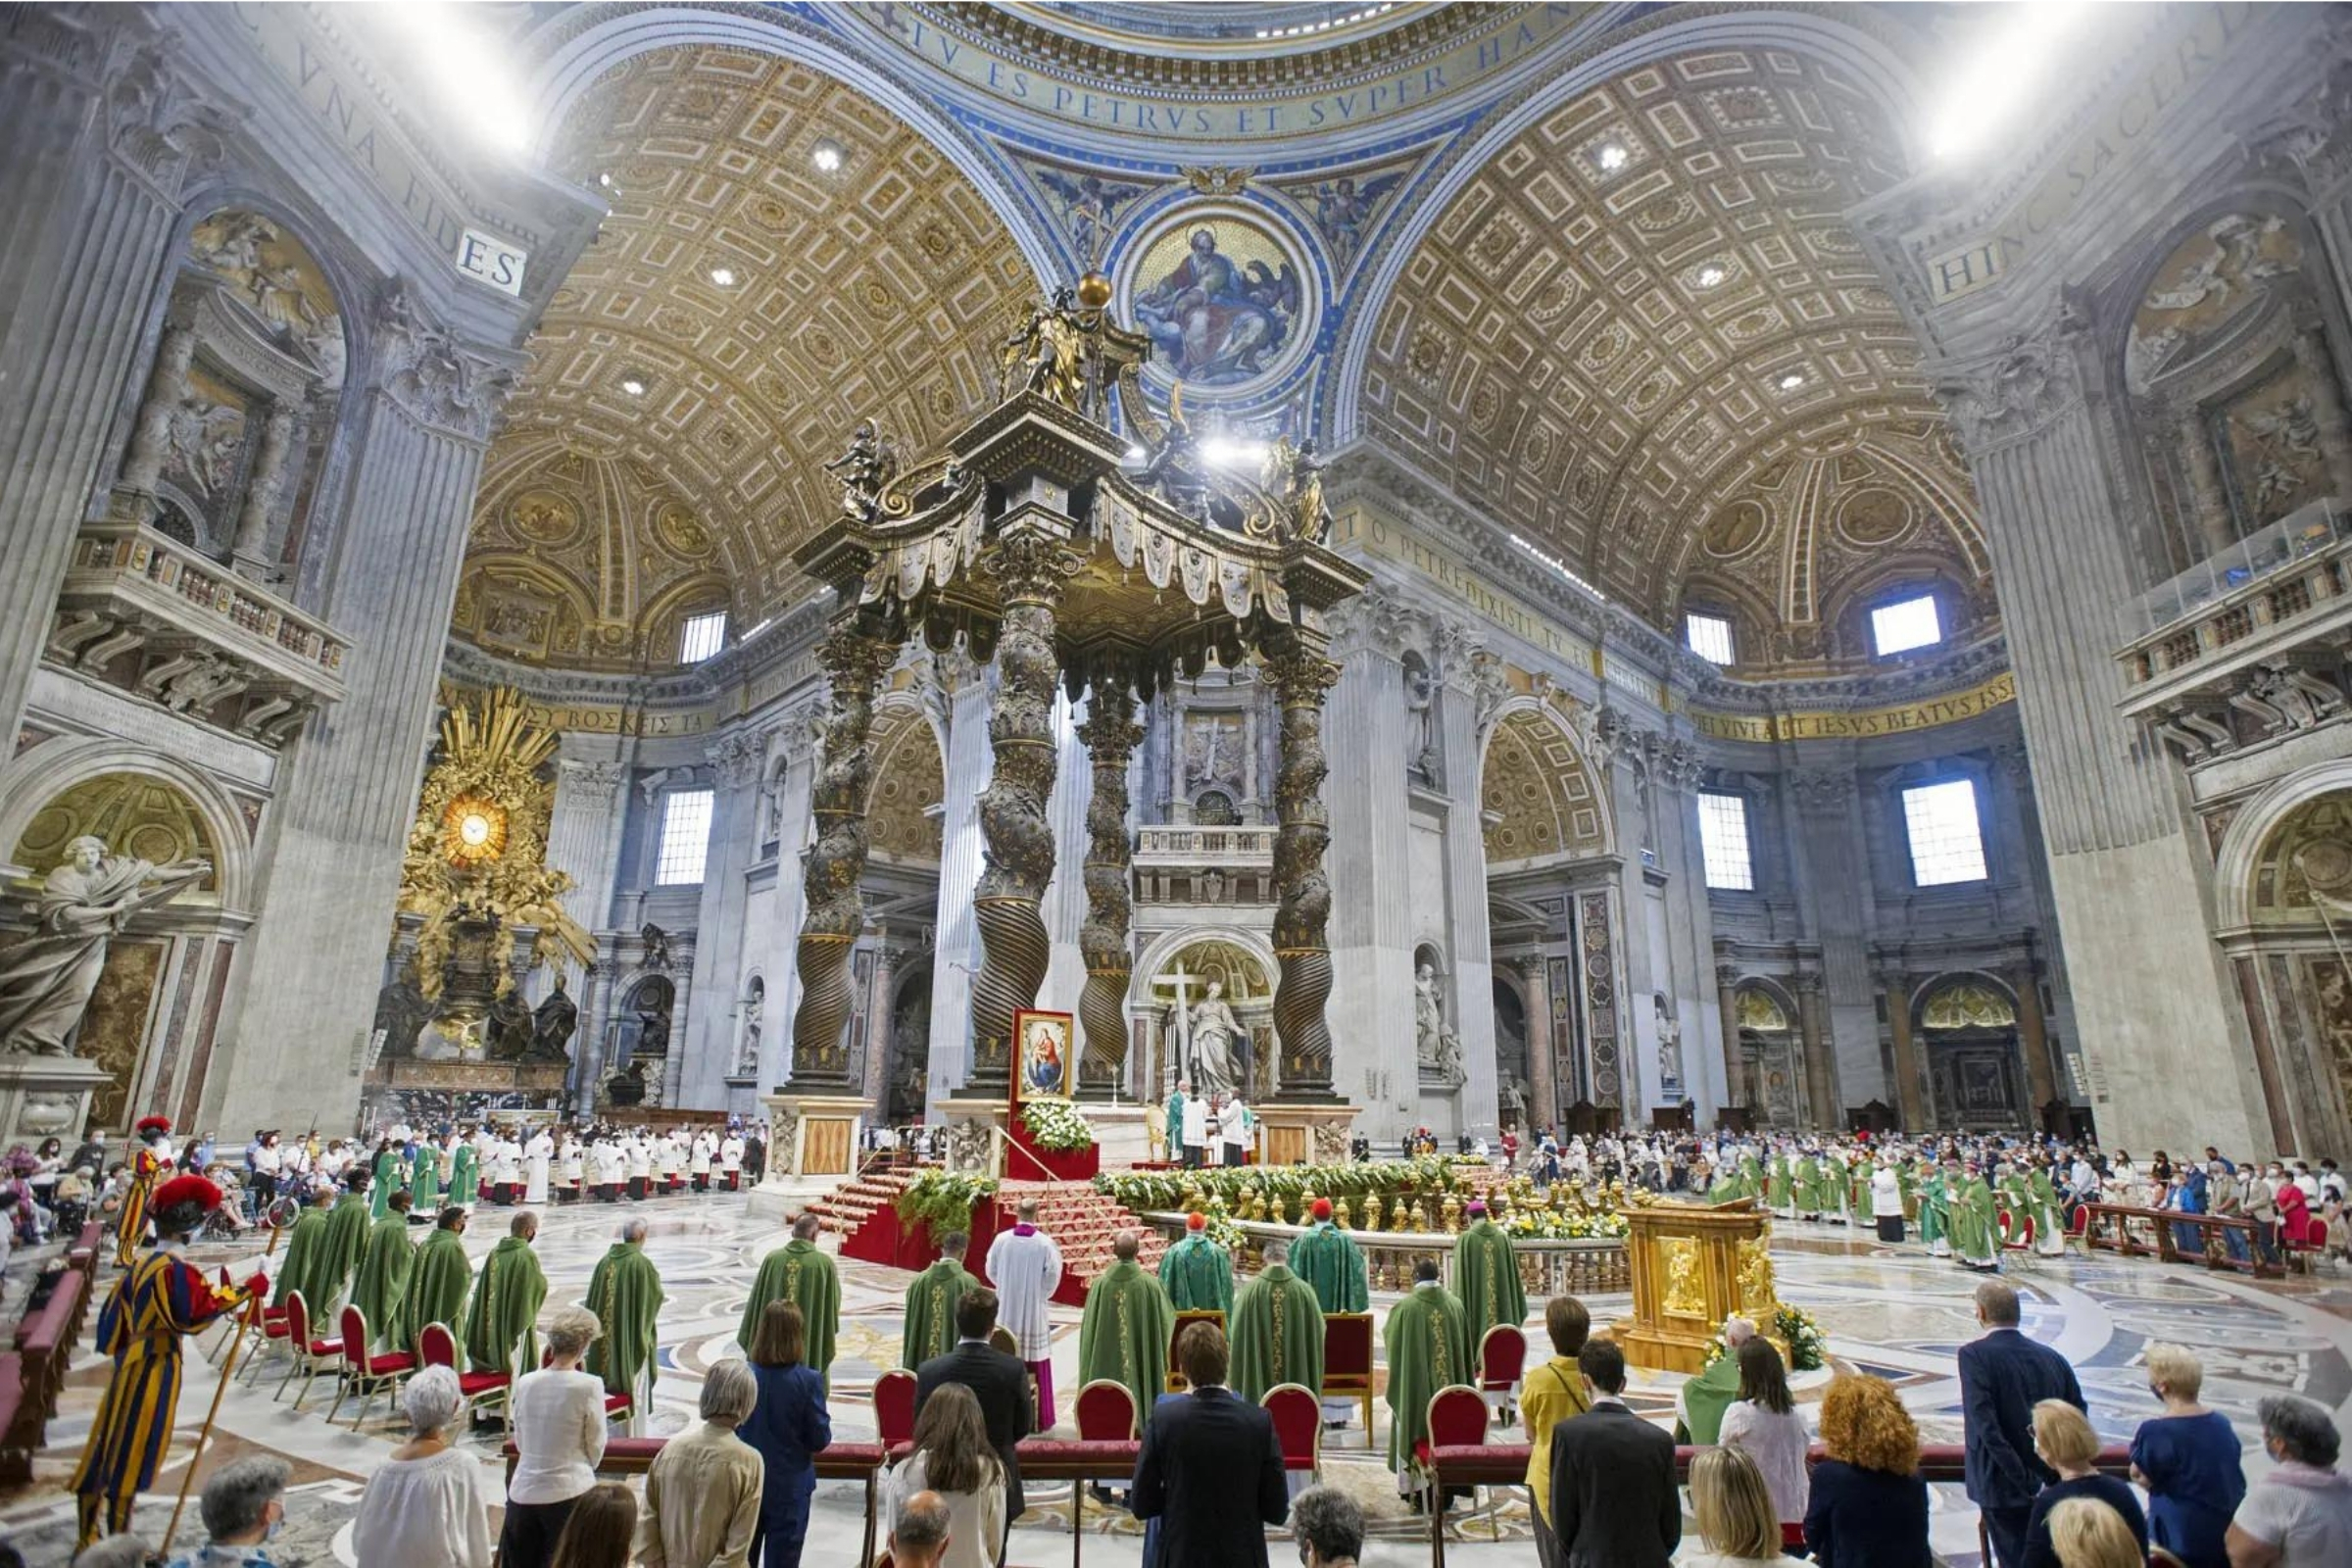 Flowers Help Deliver the Pope’s Blessing For First World Day for Grandparents and Elderly St. Peter’s Basilica in Rome